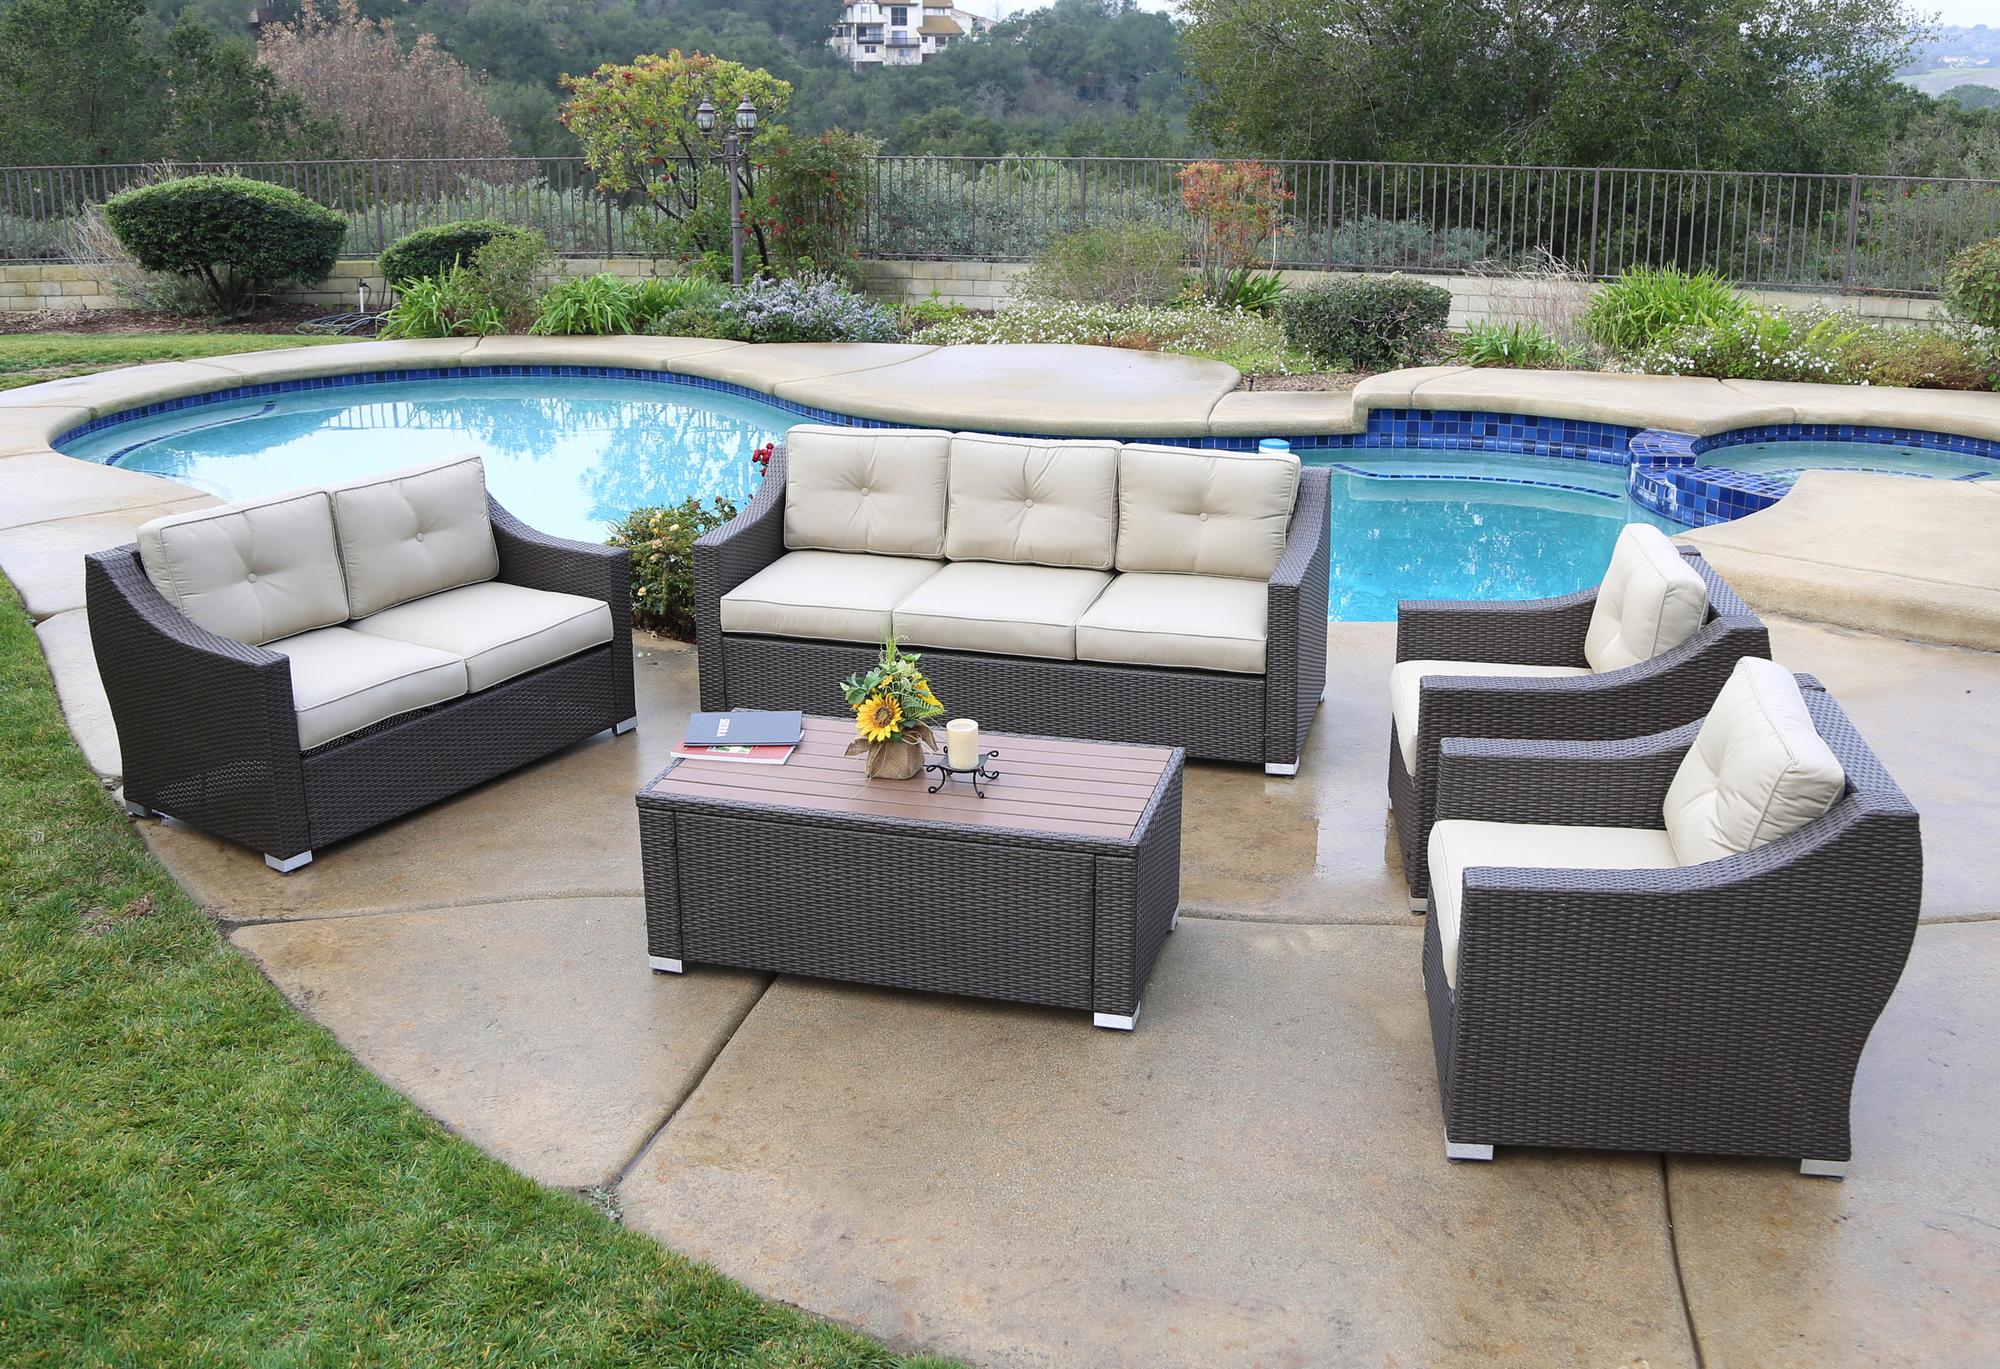 Sb-3775ds-6 5 Piece South Beach Wicker Patio Deep Seating Group With Cushion